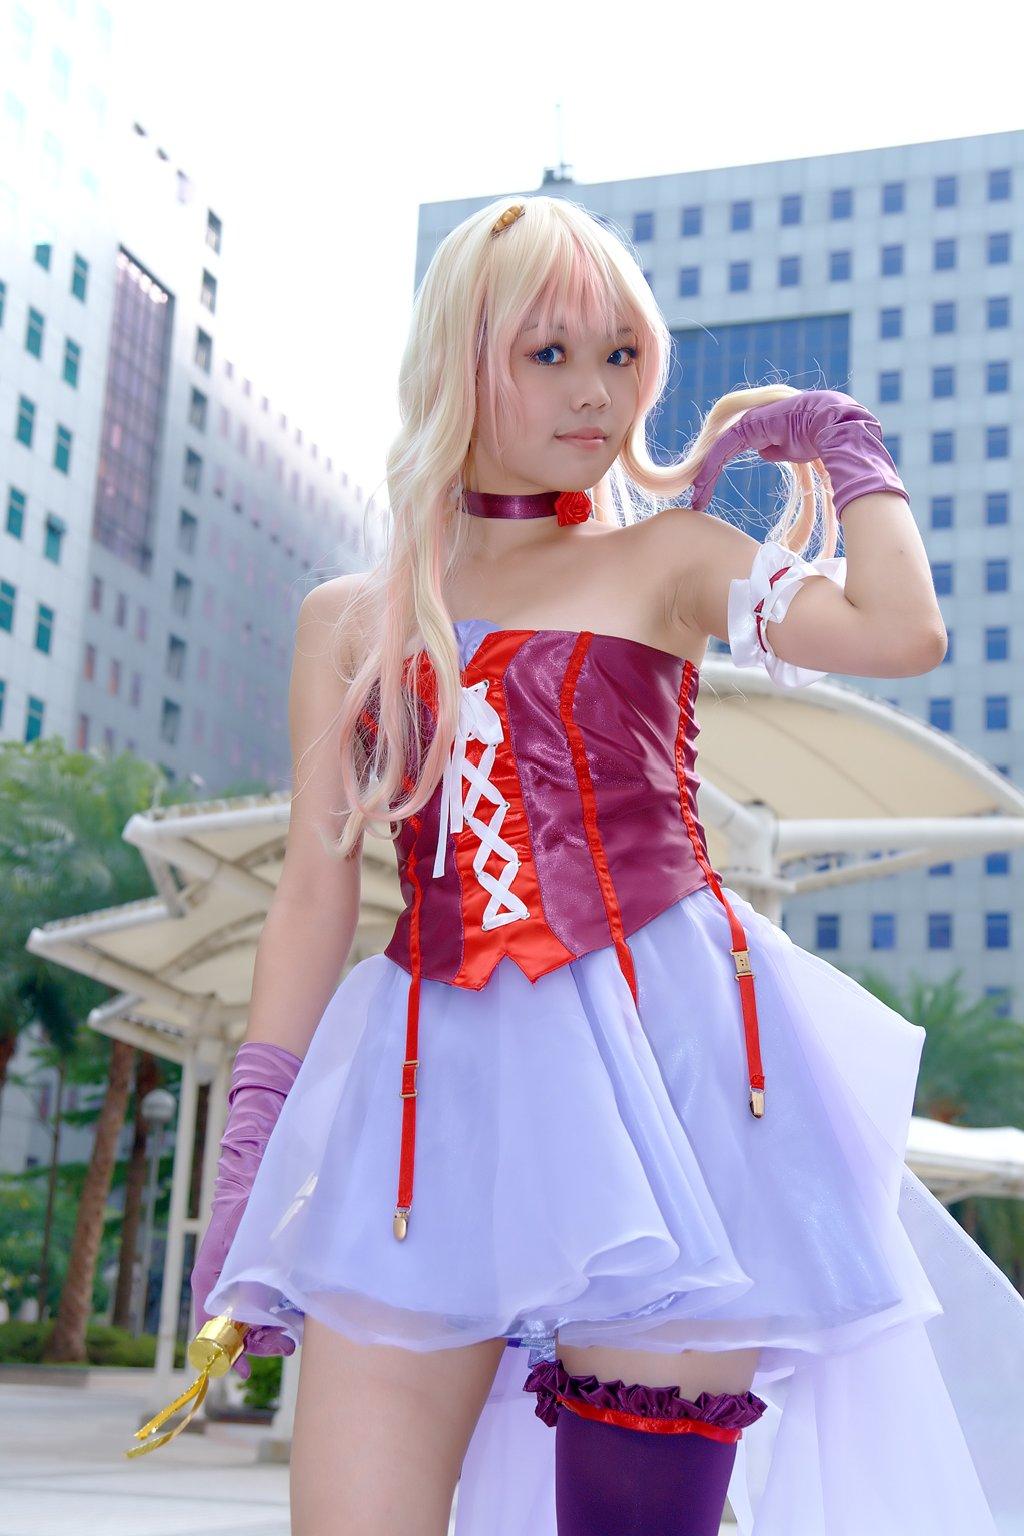 powered vbulletin cosplay Asian by